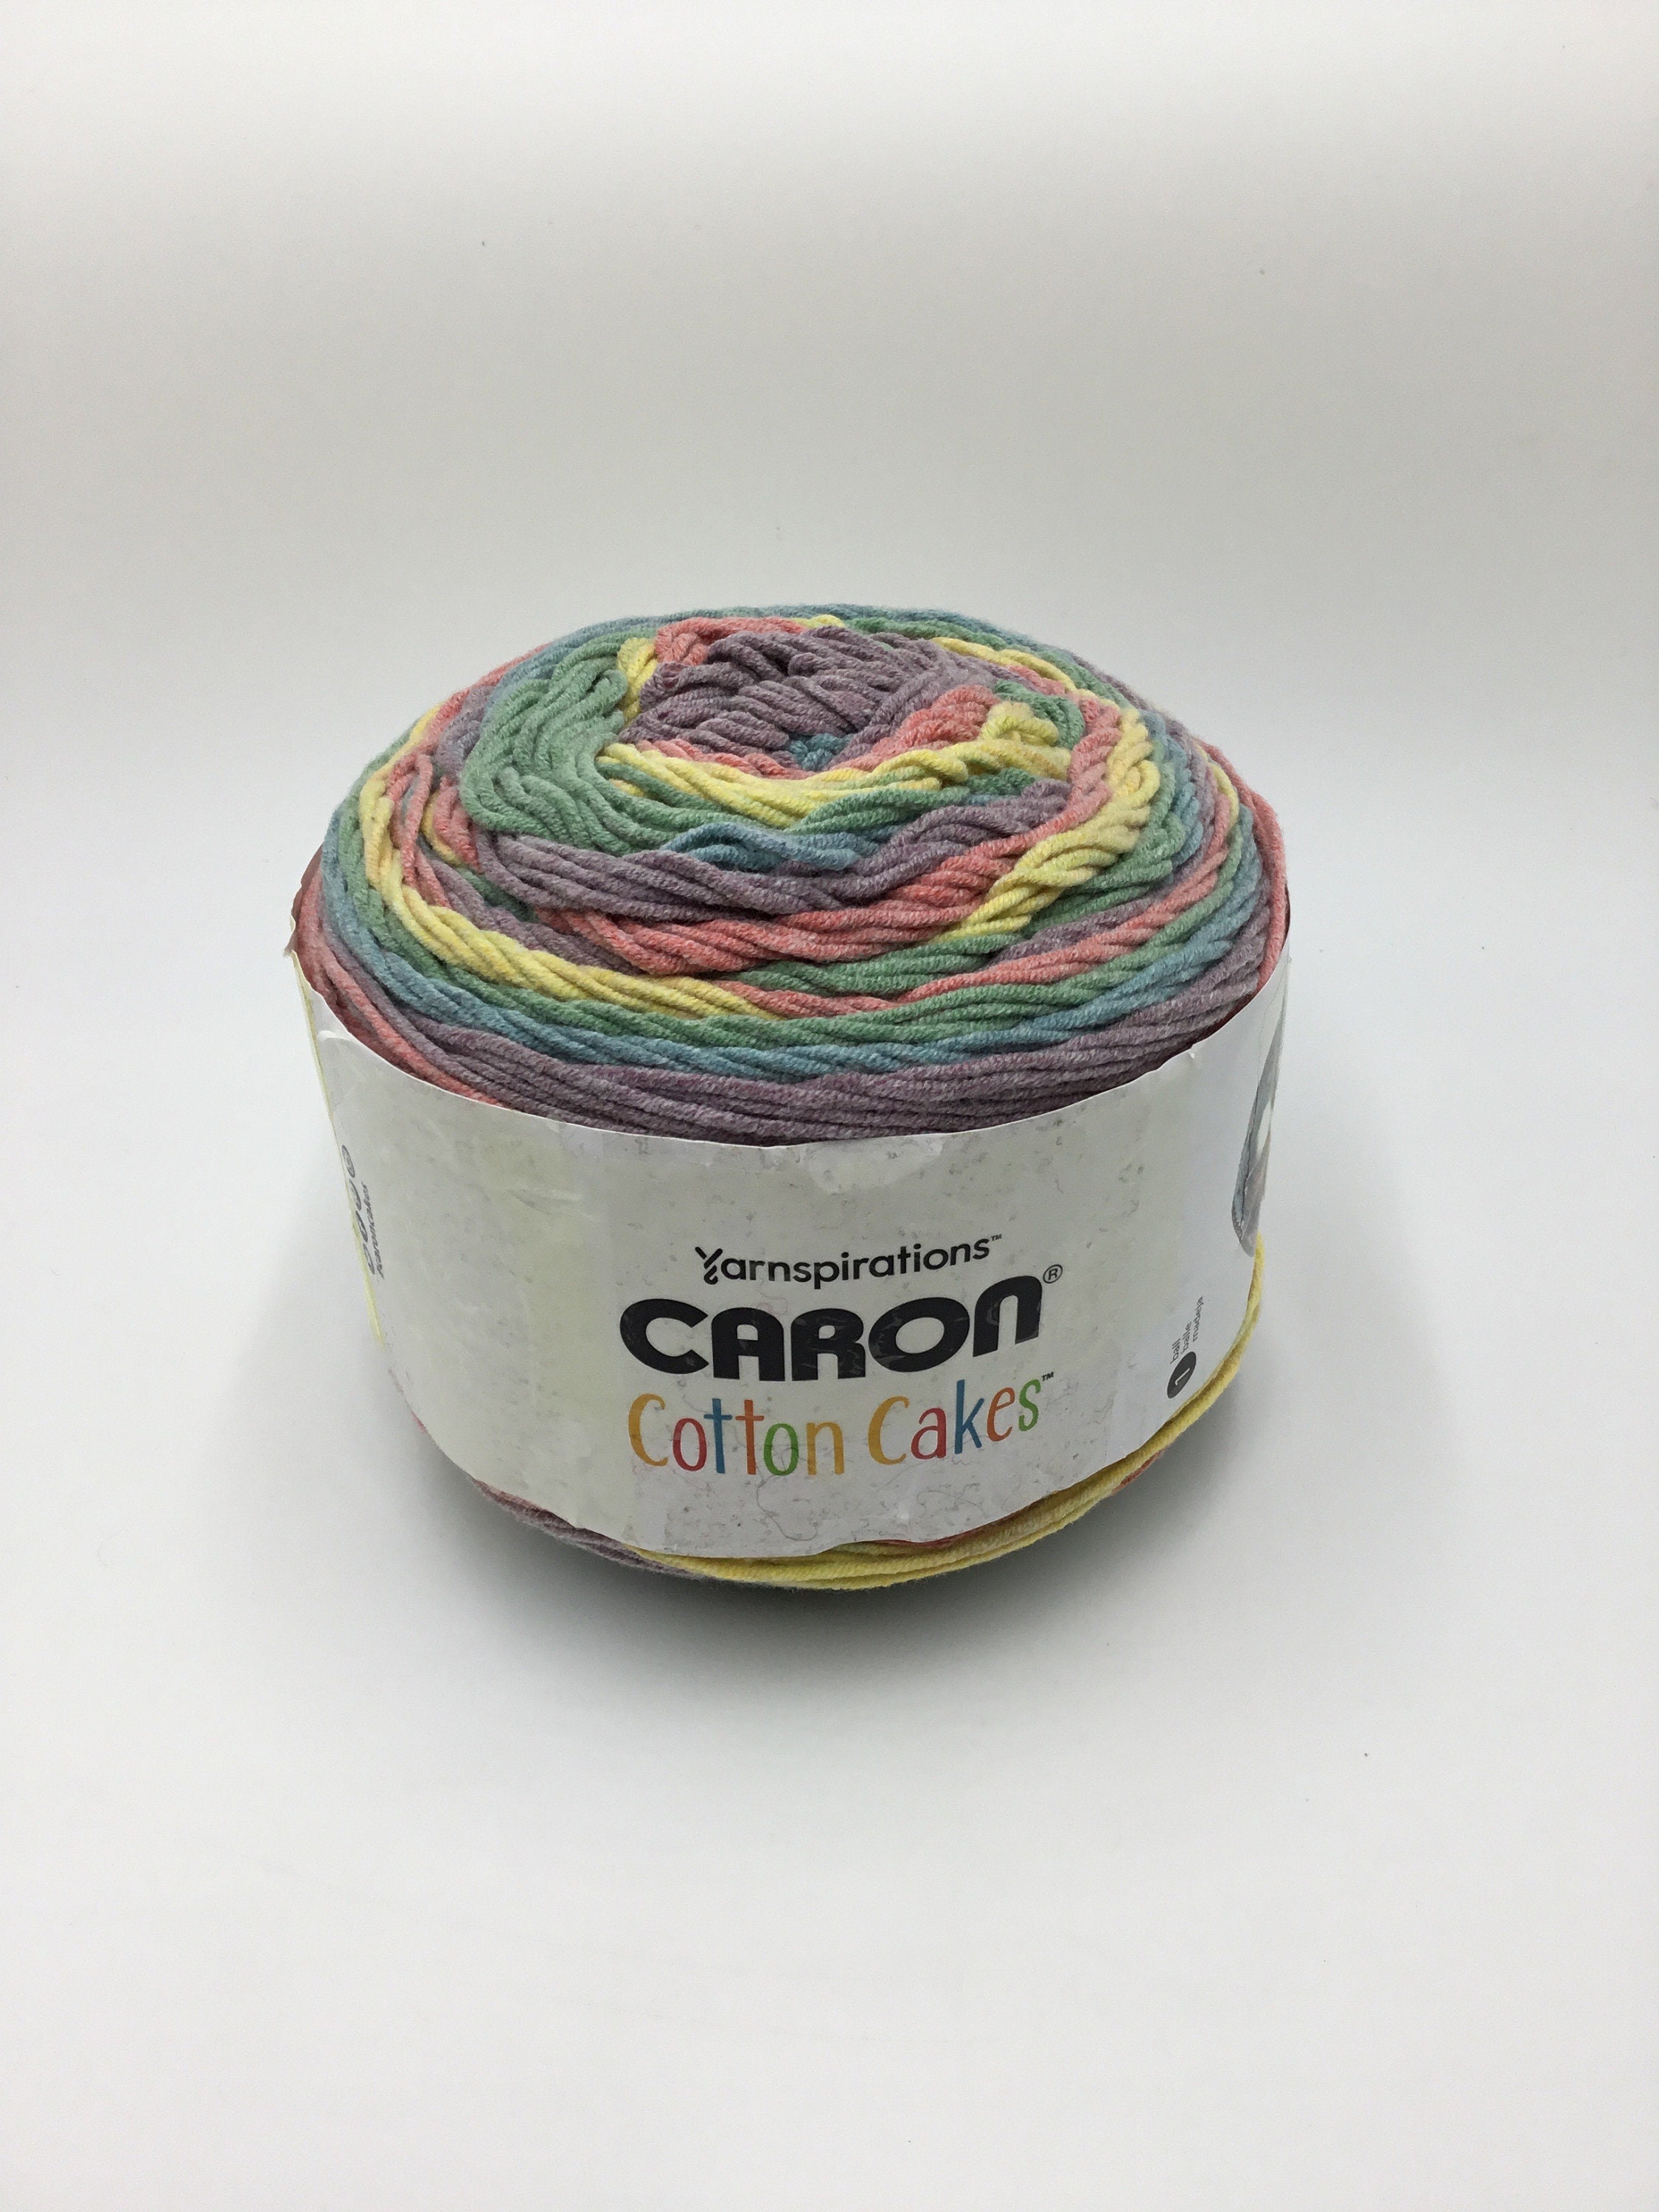 Big Cakes Yarn by Caron - Multicolor Yarn for Knitting, Crochet, Weaving,  Arts & Crafts - Toffee Brickle, Bulk 12 Pack